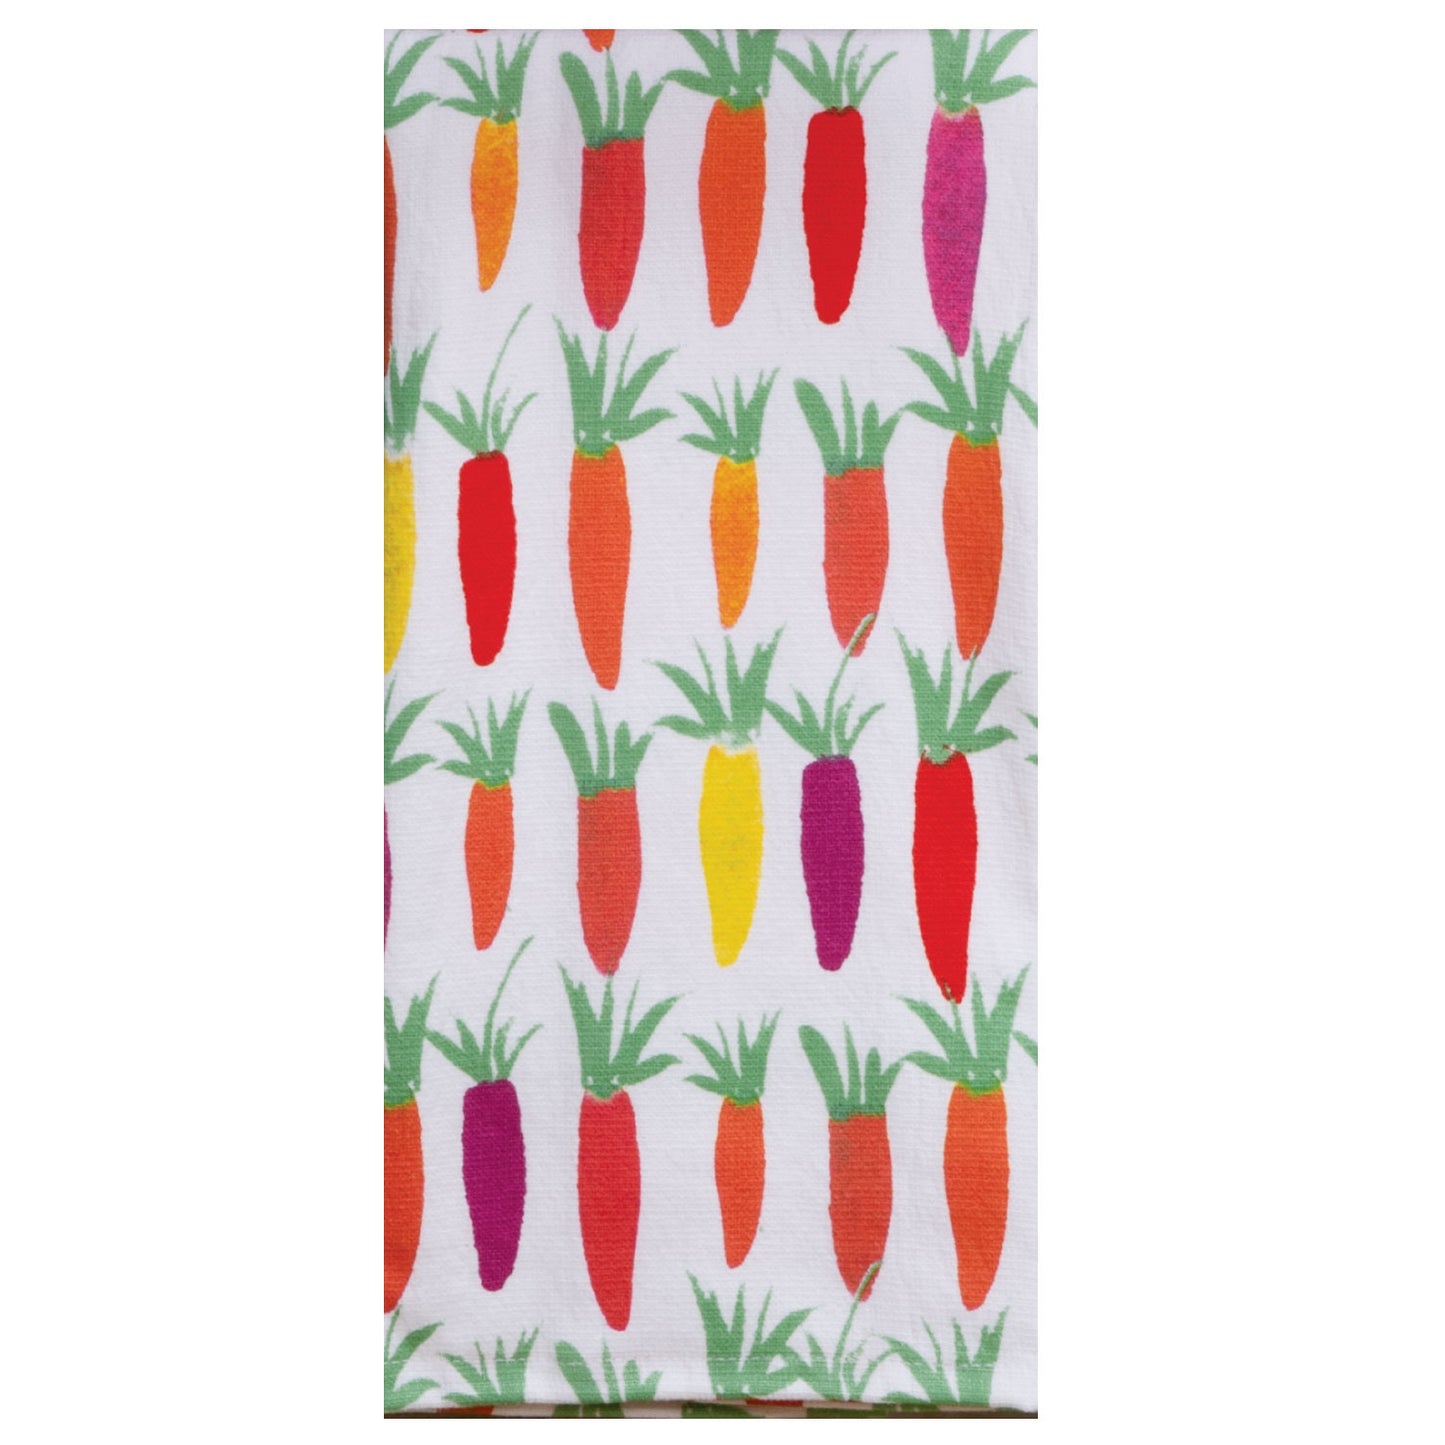 Colorful Carrots Dual Purpose Terry Towel